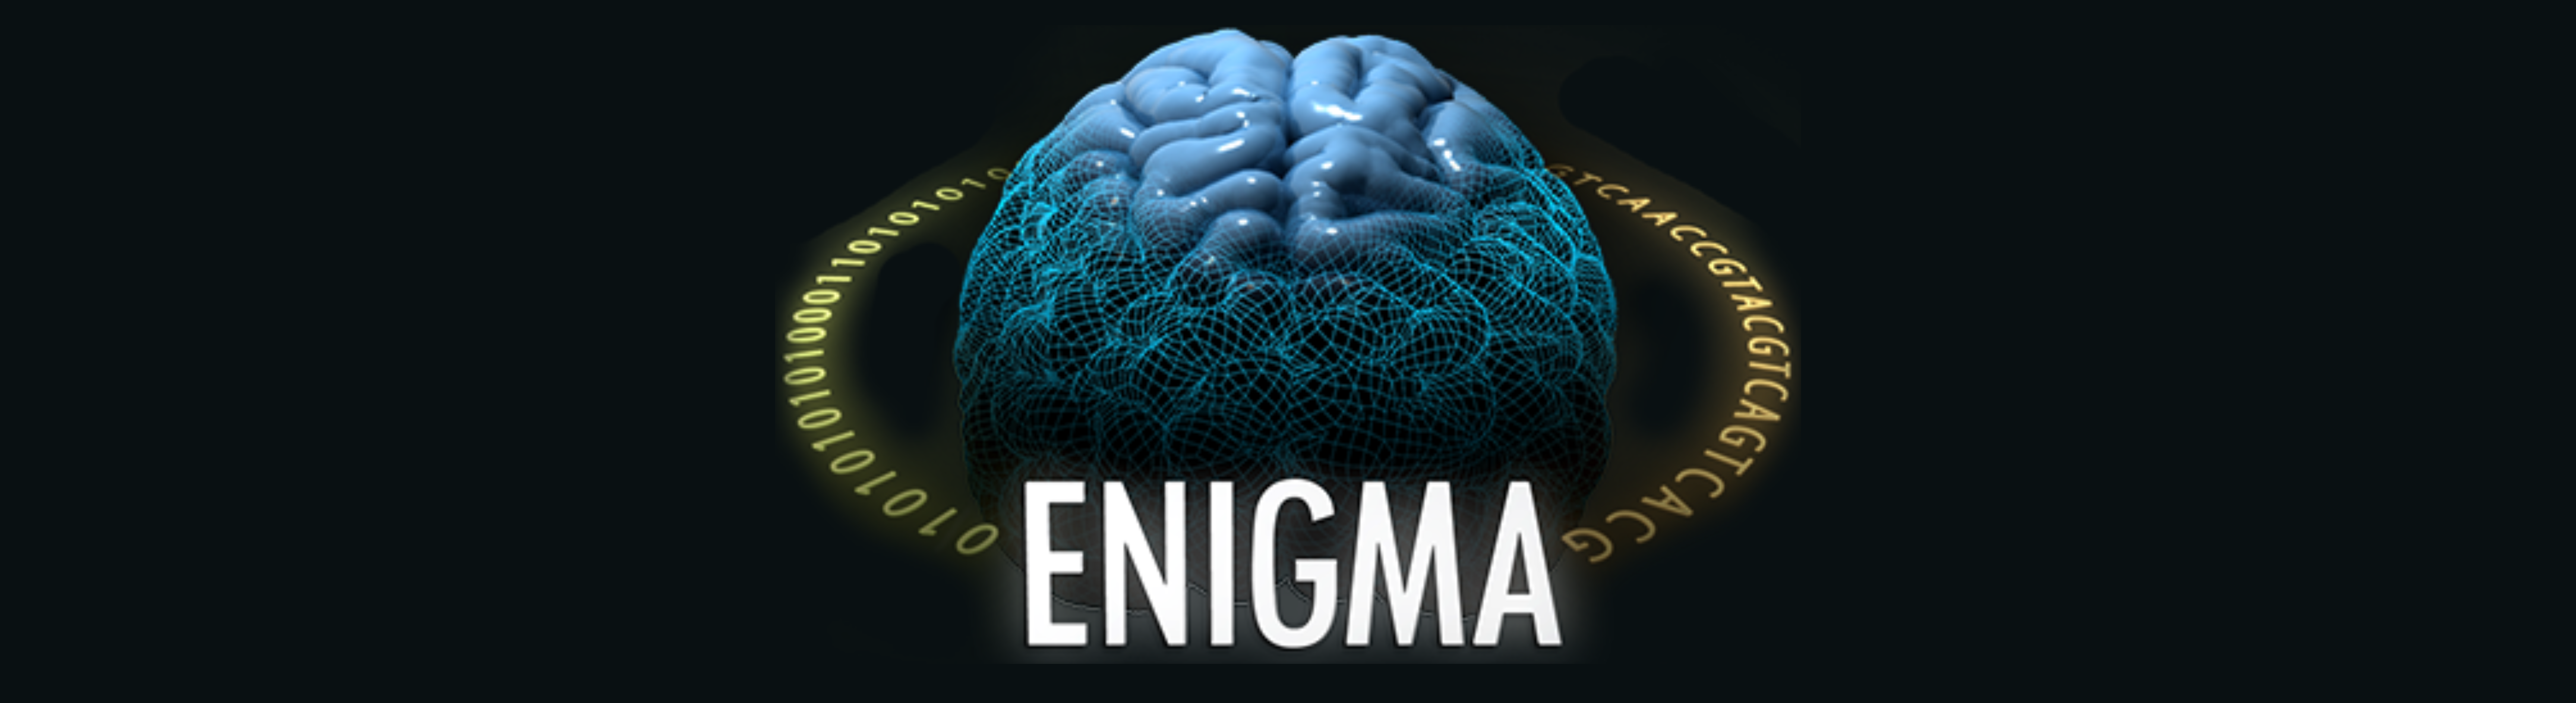 Enigma - All You Need to Know BEFORE You Go (with Photos)